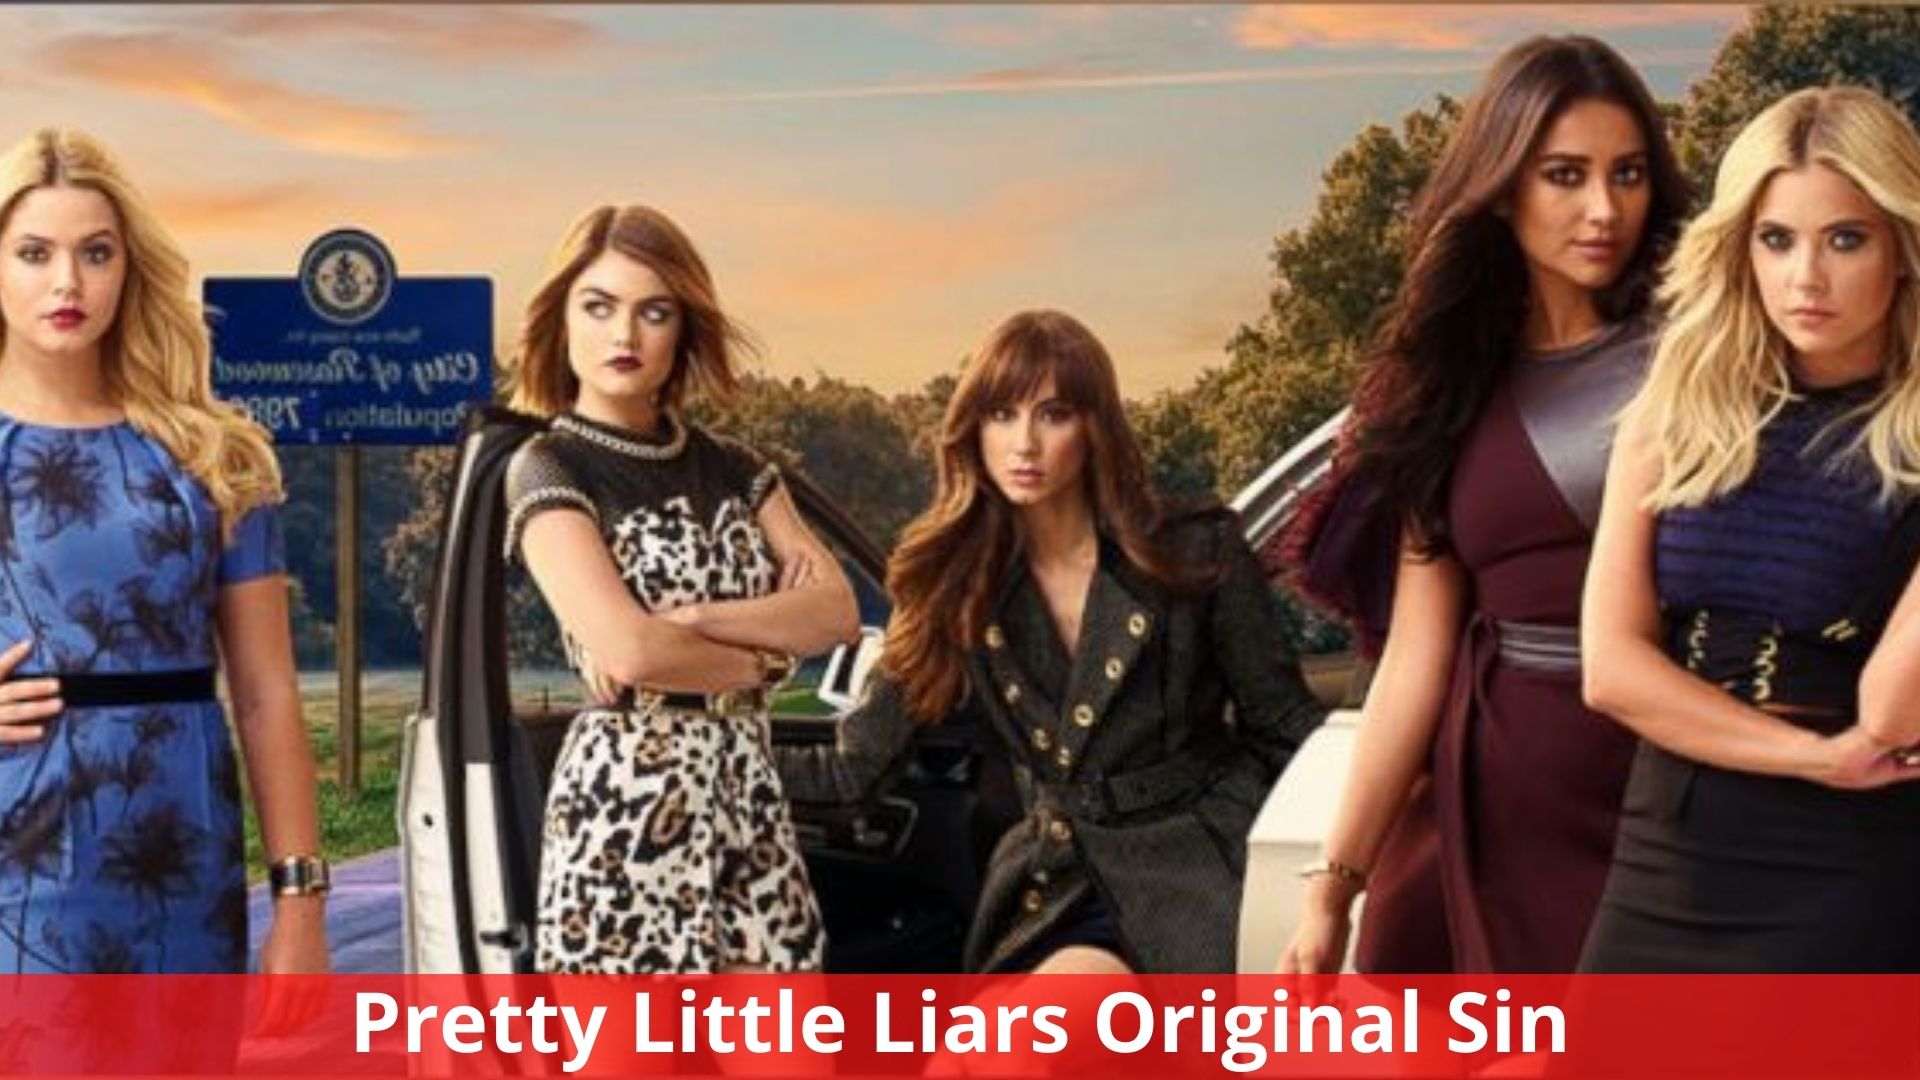 Pretty Little Liars Original Sin: Premiere Date, Cast, And Everything You Need to Know!